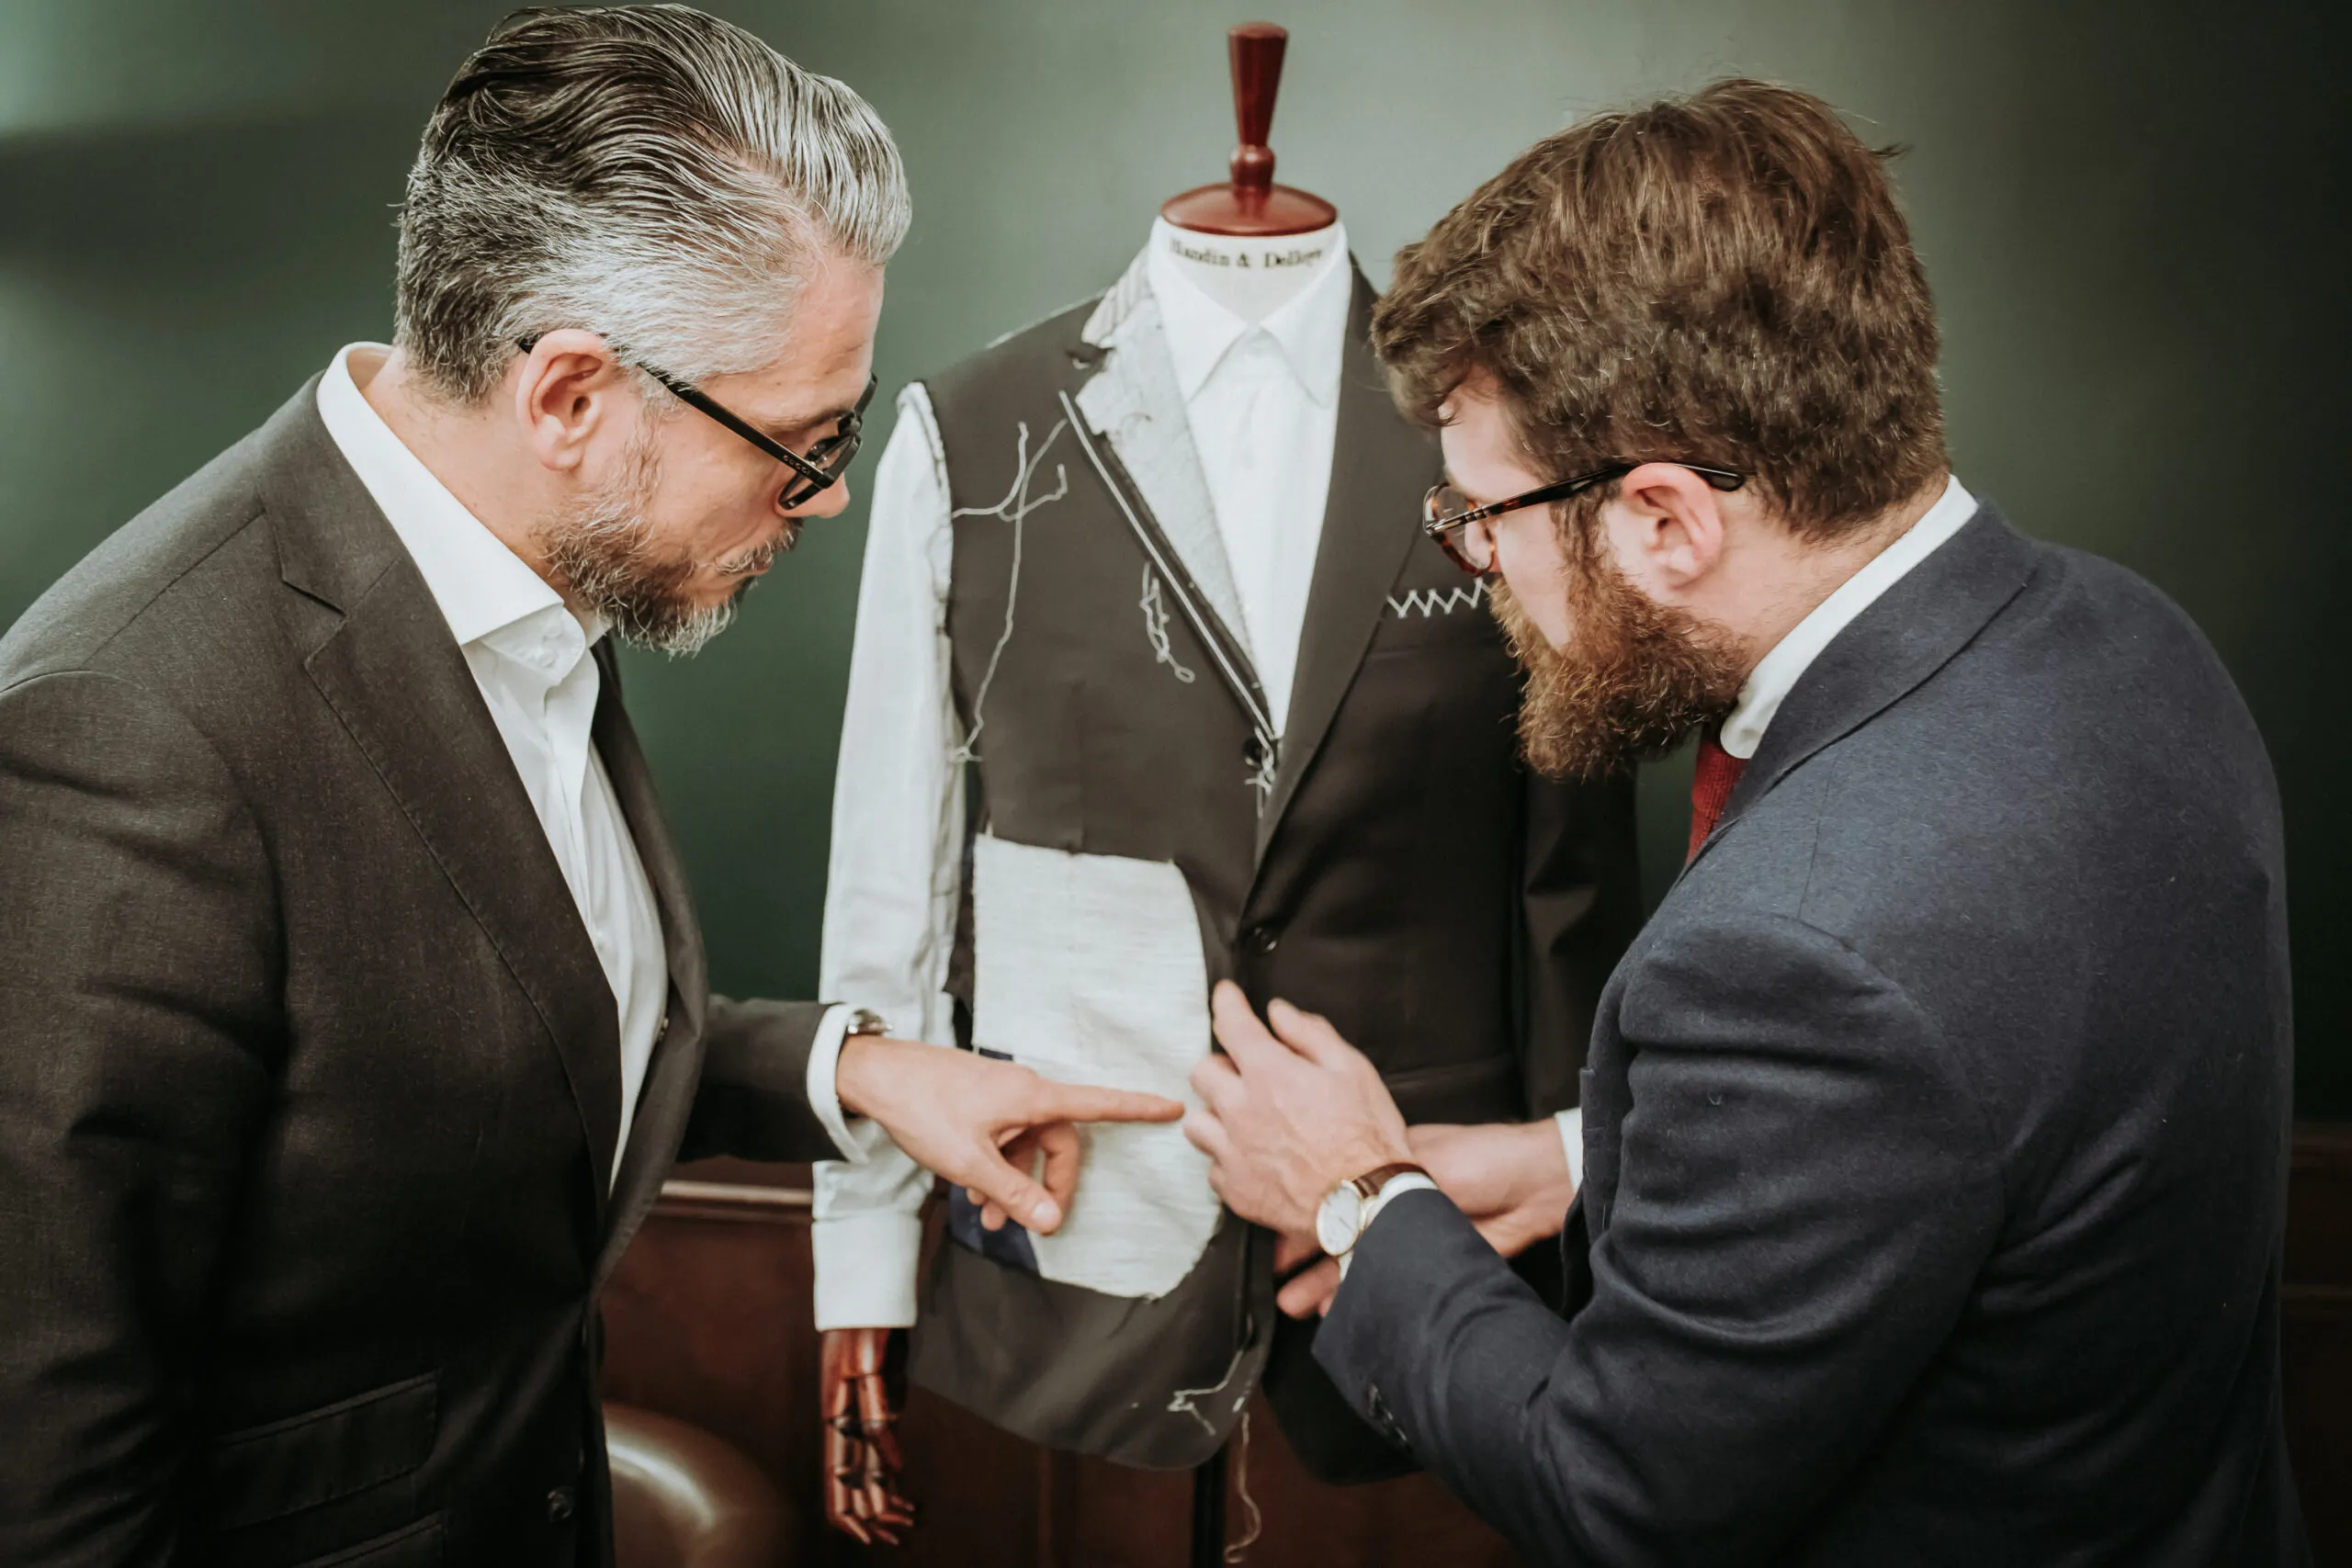 Made-to-measure outfit - Blandin & Delloye Tailor made suit